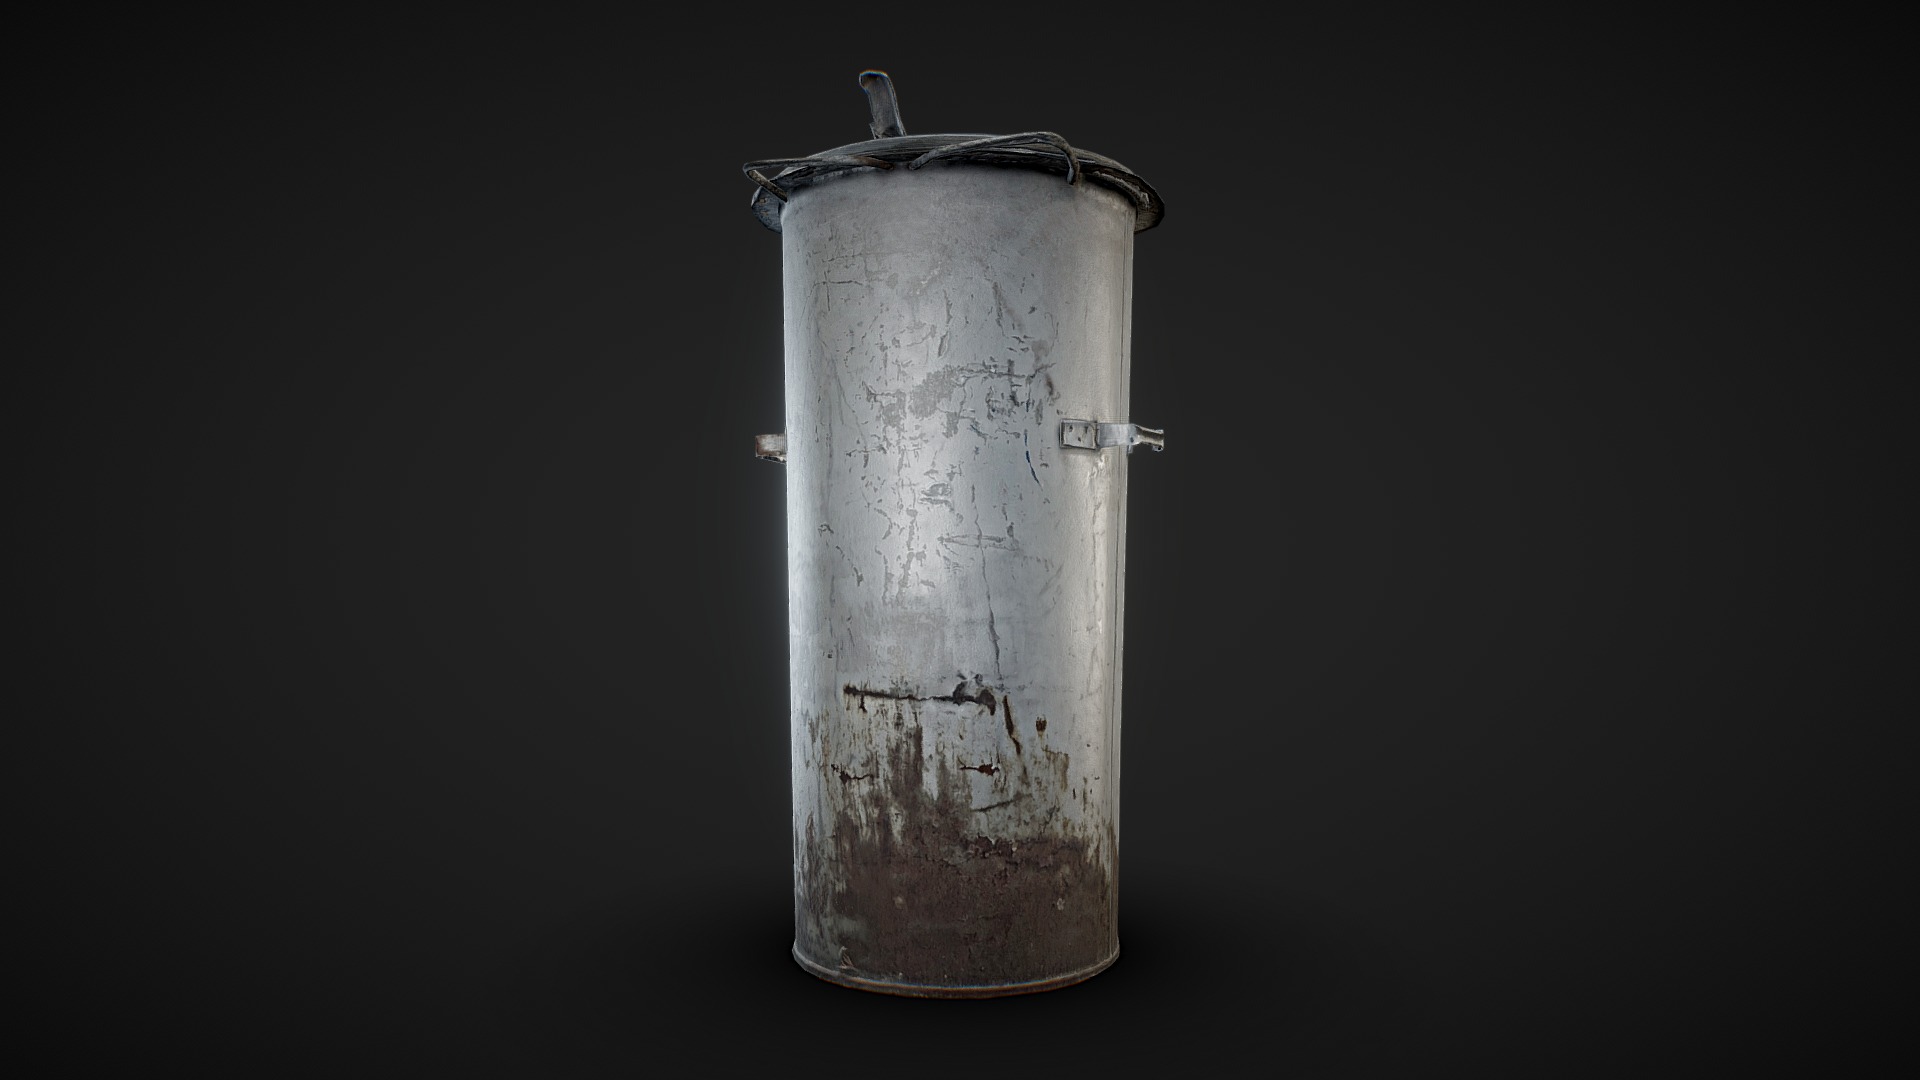 3D model Trash Can Photogrammetry Low Poly Model - This is a 3D model of the Trash Can Photogrammetry Low Poly Model. The 3D model is about a cylindrical metal object.